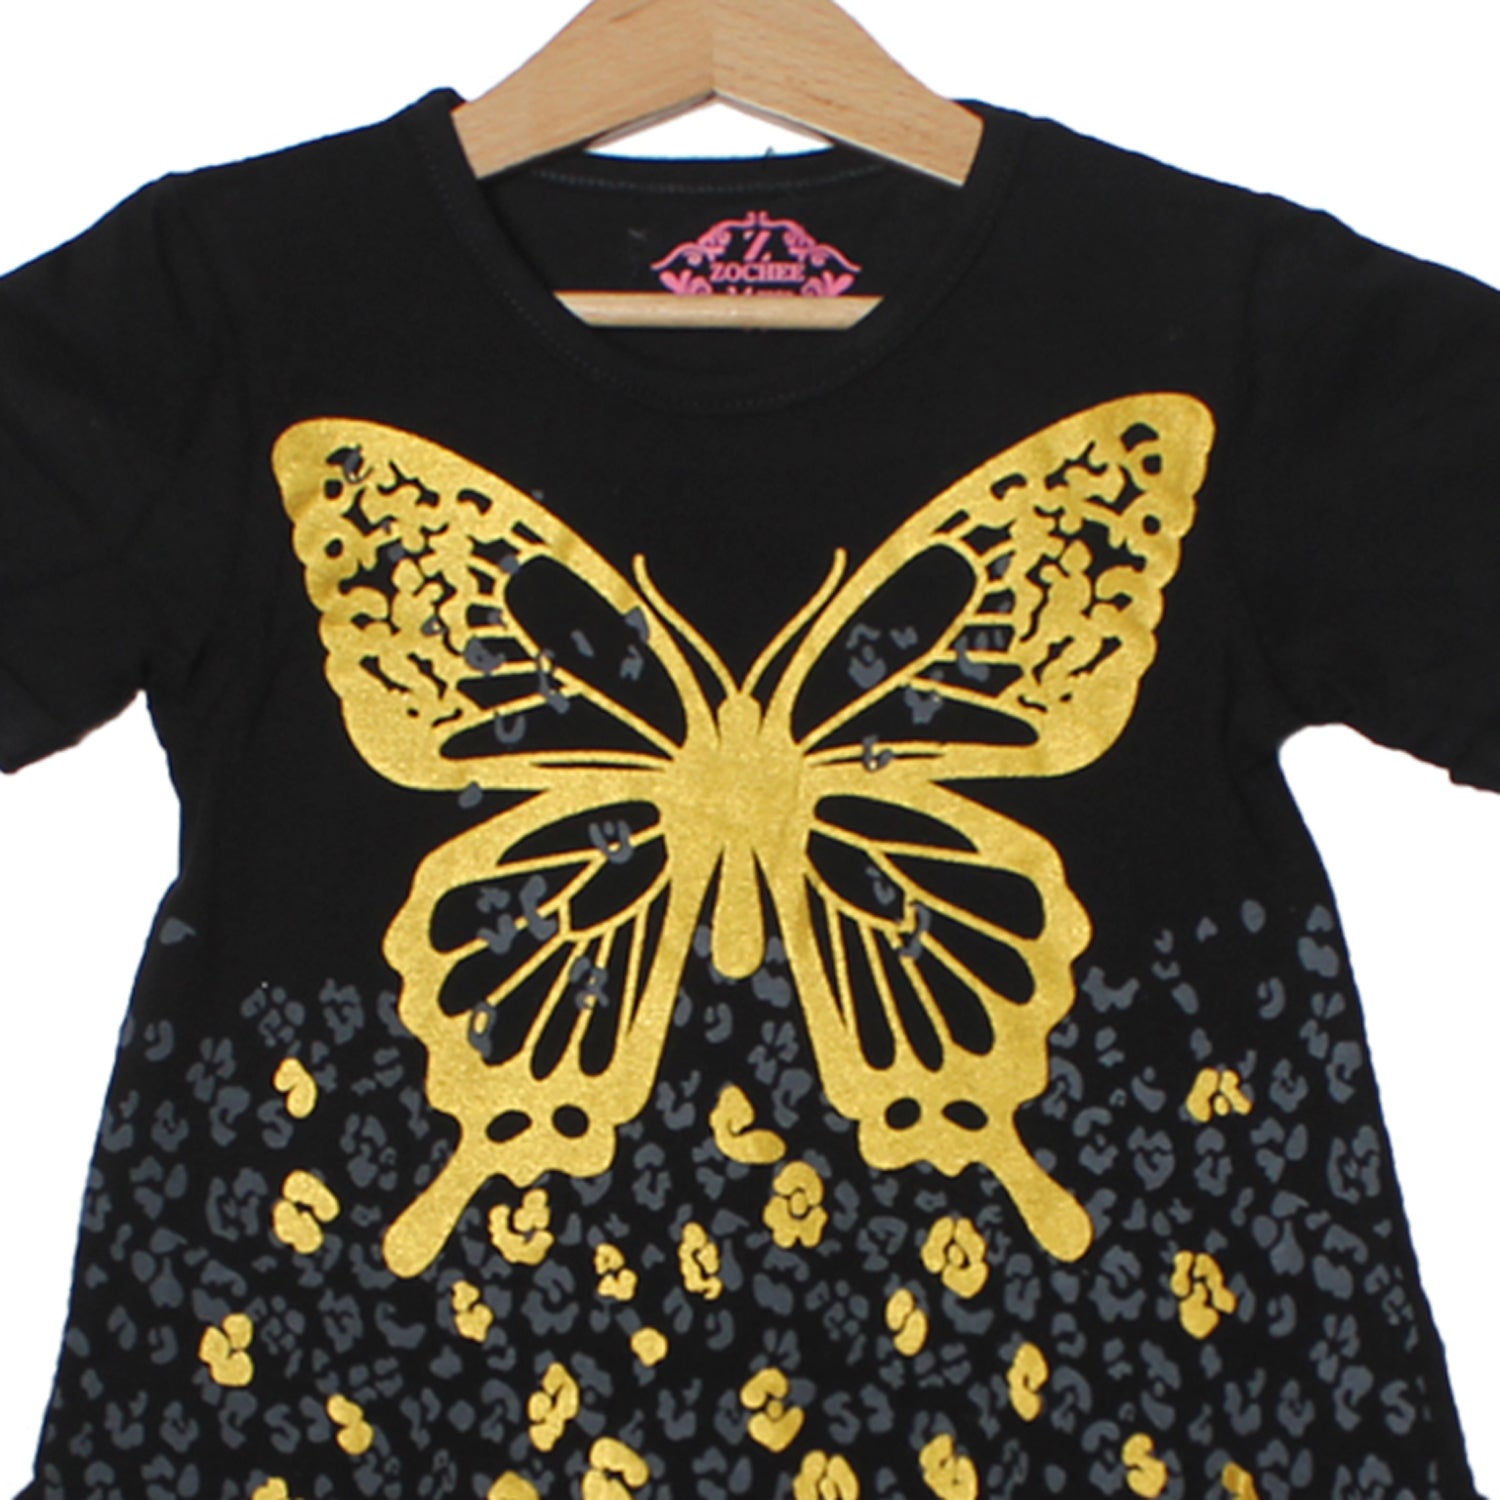 NEW BLACK BUTTERFLY PRINTED T-SHIRT TOP FOR GIRLS